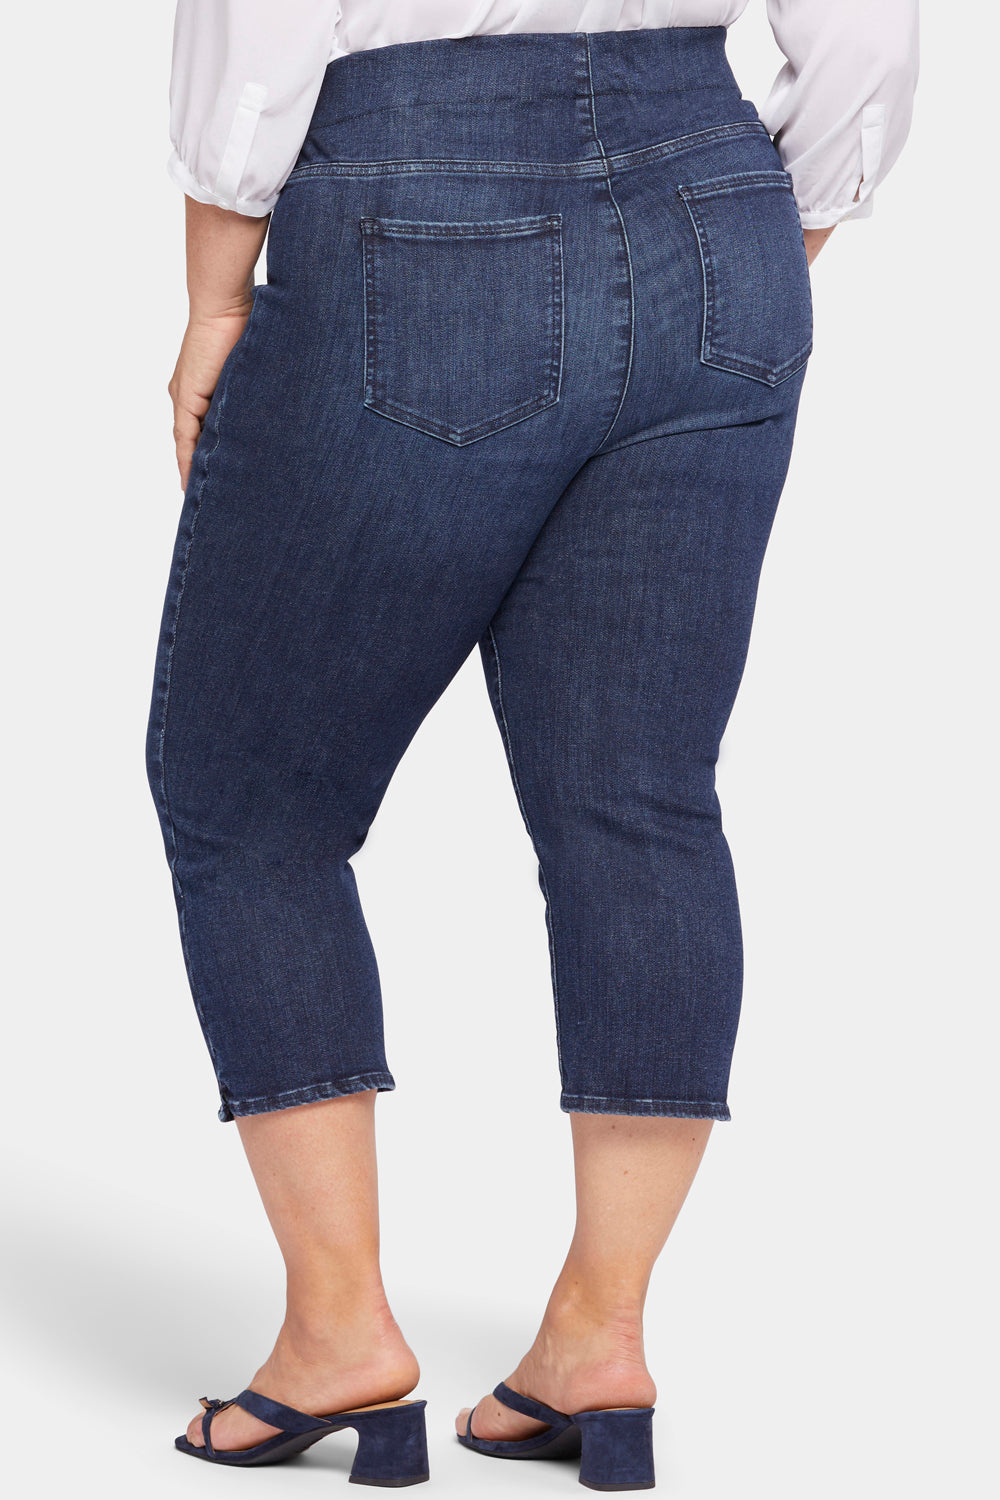 NYDJ Dakota Crop Pull-On Jeans In Plus Size In SpanSpring™ Denim With Side Slits - Mesquite